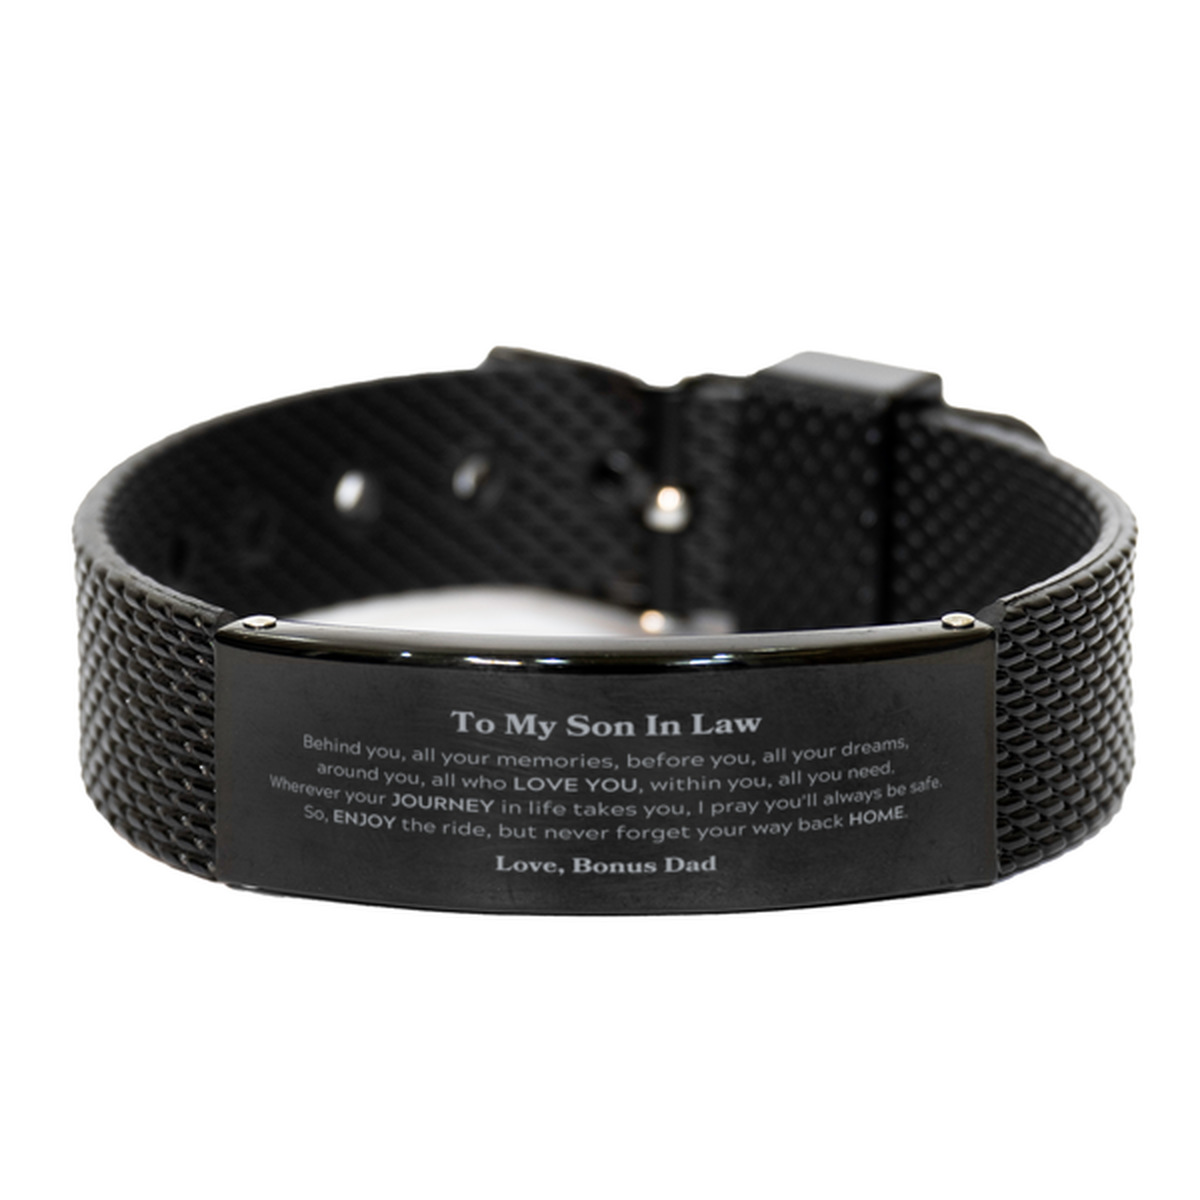 To My Son In Law Graduation Gifts from Bonus Dad, Son In Law Black Shark Mesh Bracelet Christmas Birthday Gifts for Son In Law Behind you, all your memories, before you, all your dreams. Love, Bonus Dad